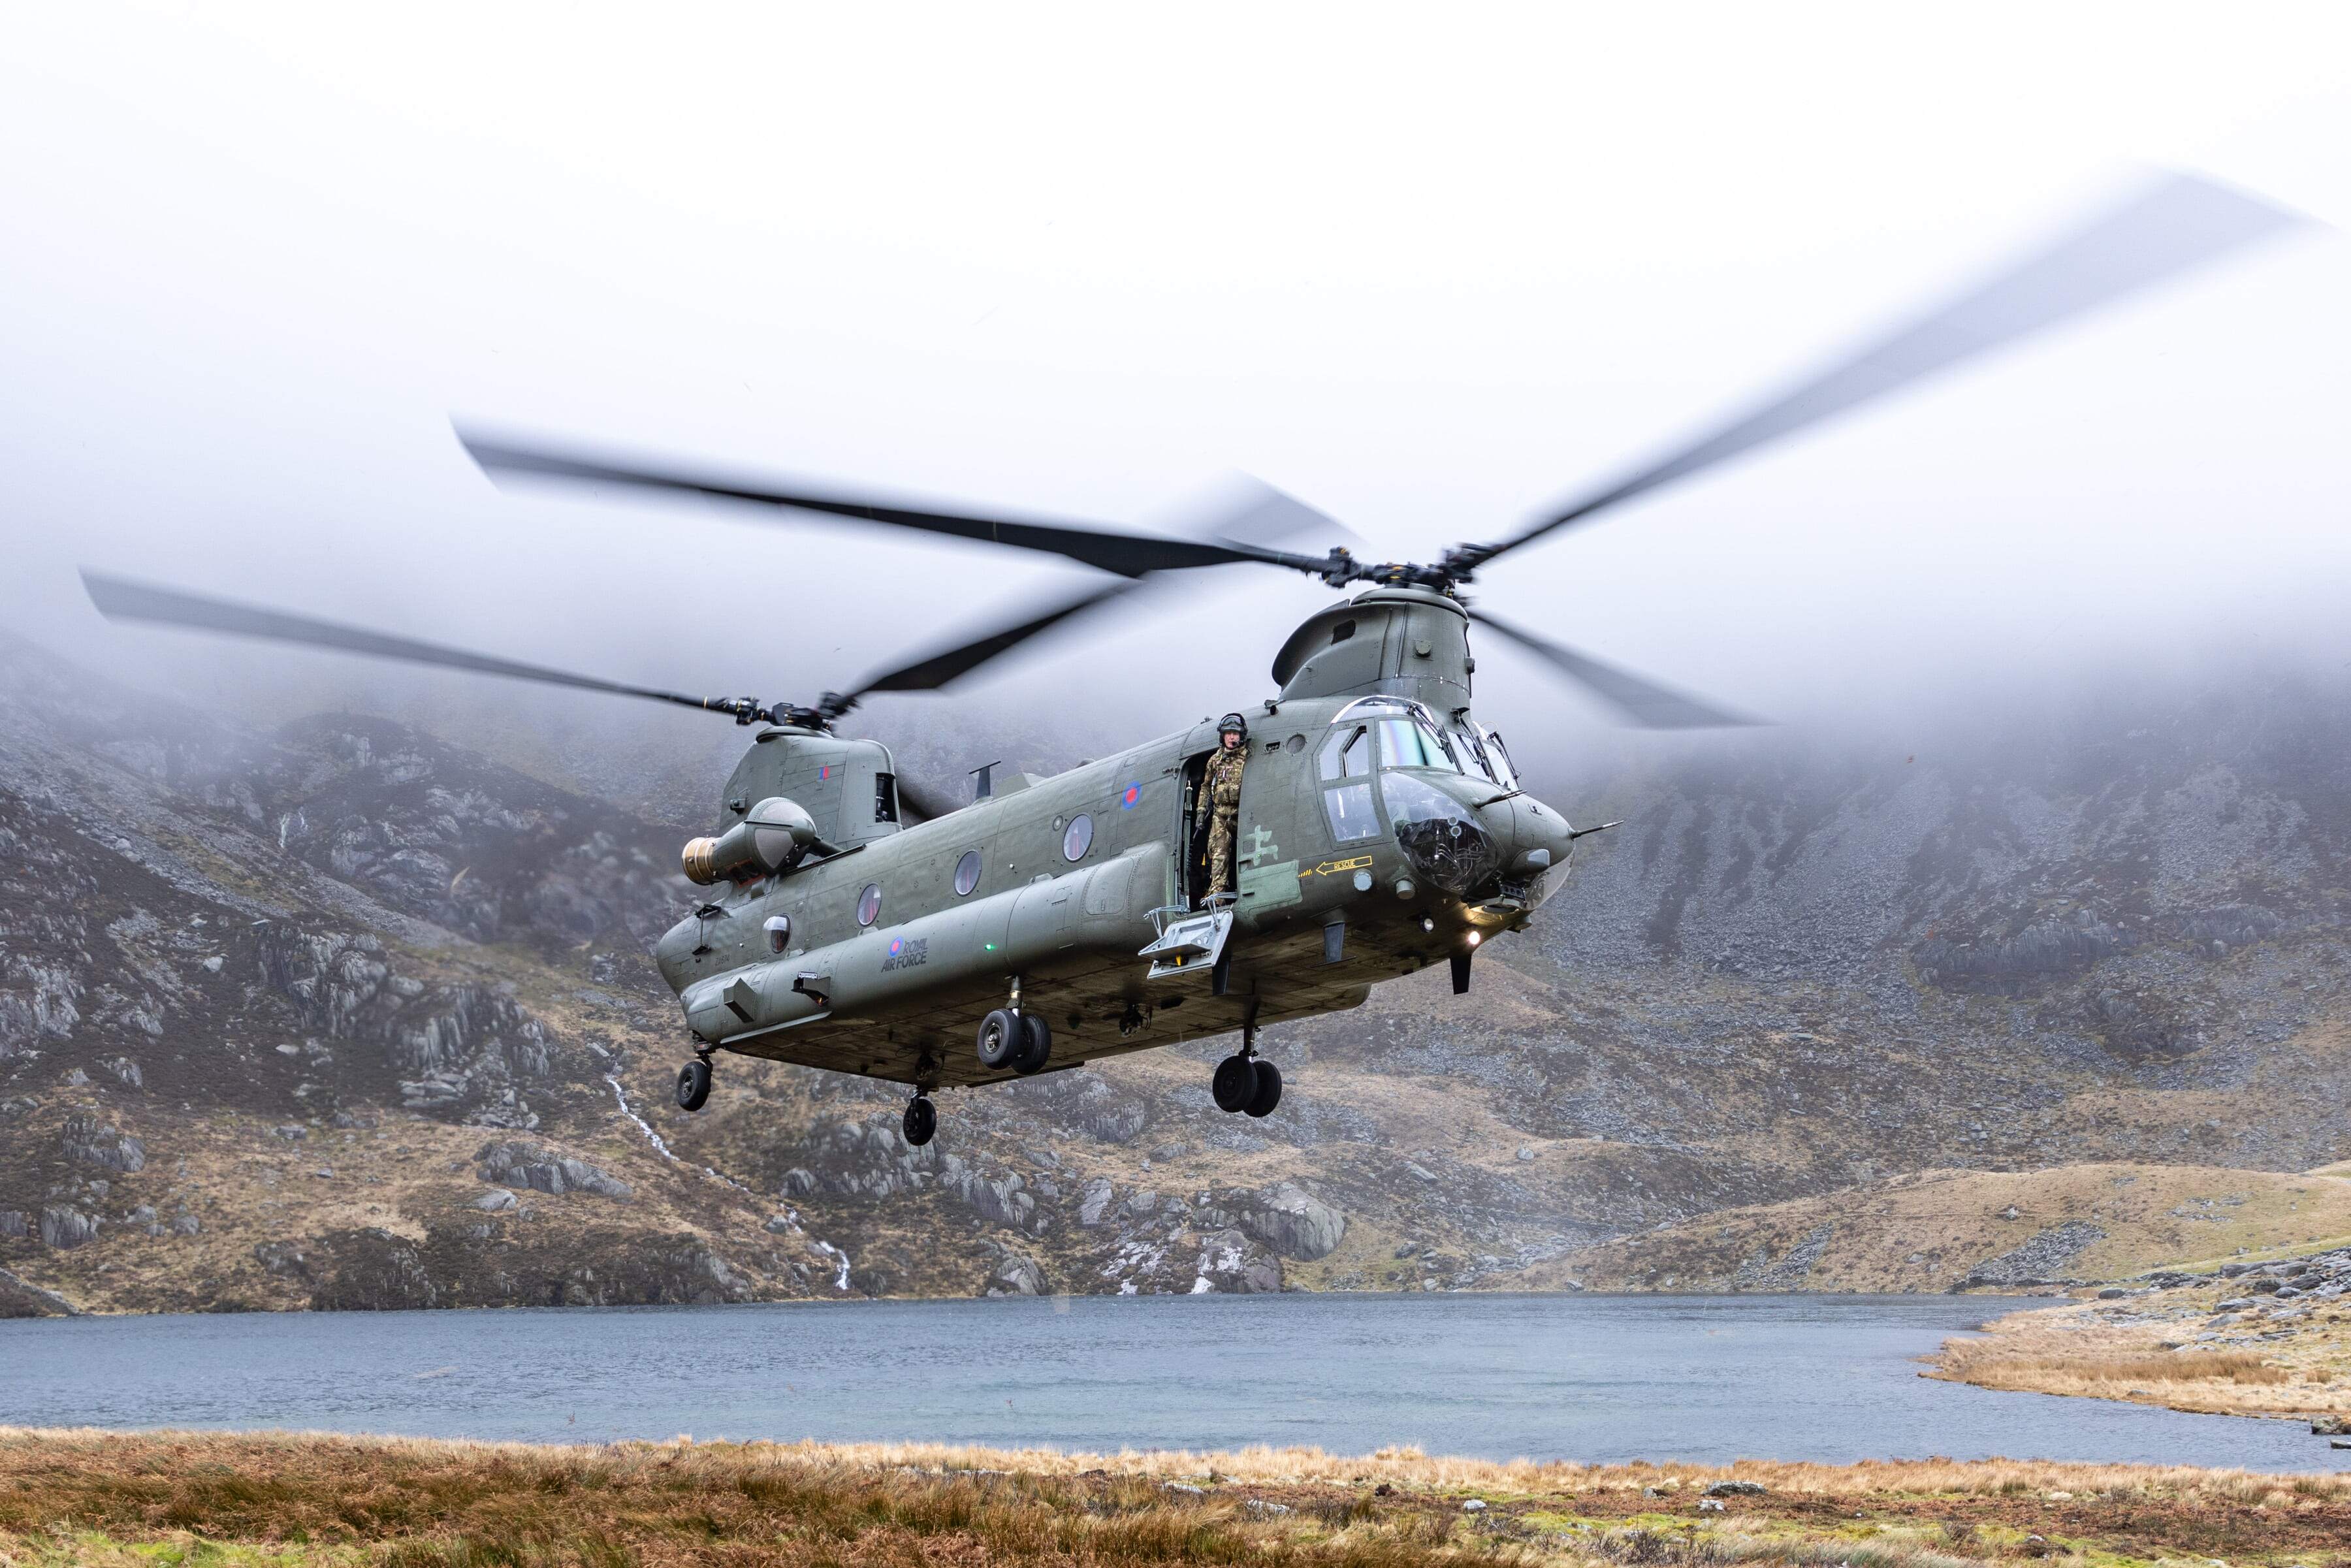 Chinook hovering low over a mountain lake with someone standing on the edge of the doorway